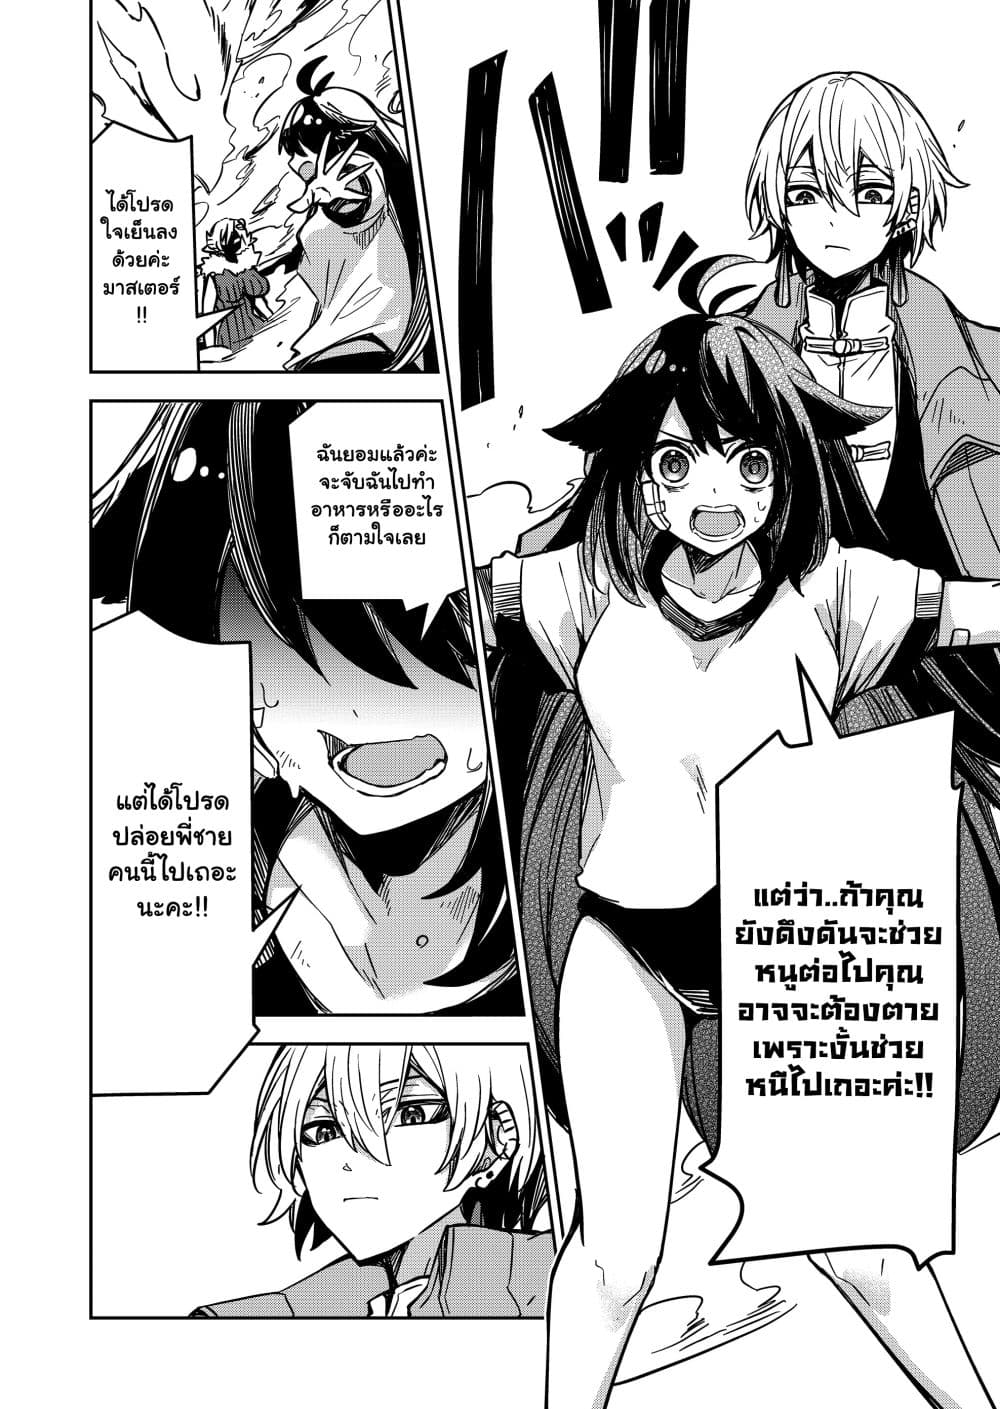 The Return of the Retired Demon Lord ตอนที่ 5.1 (6)